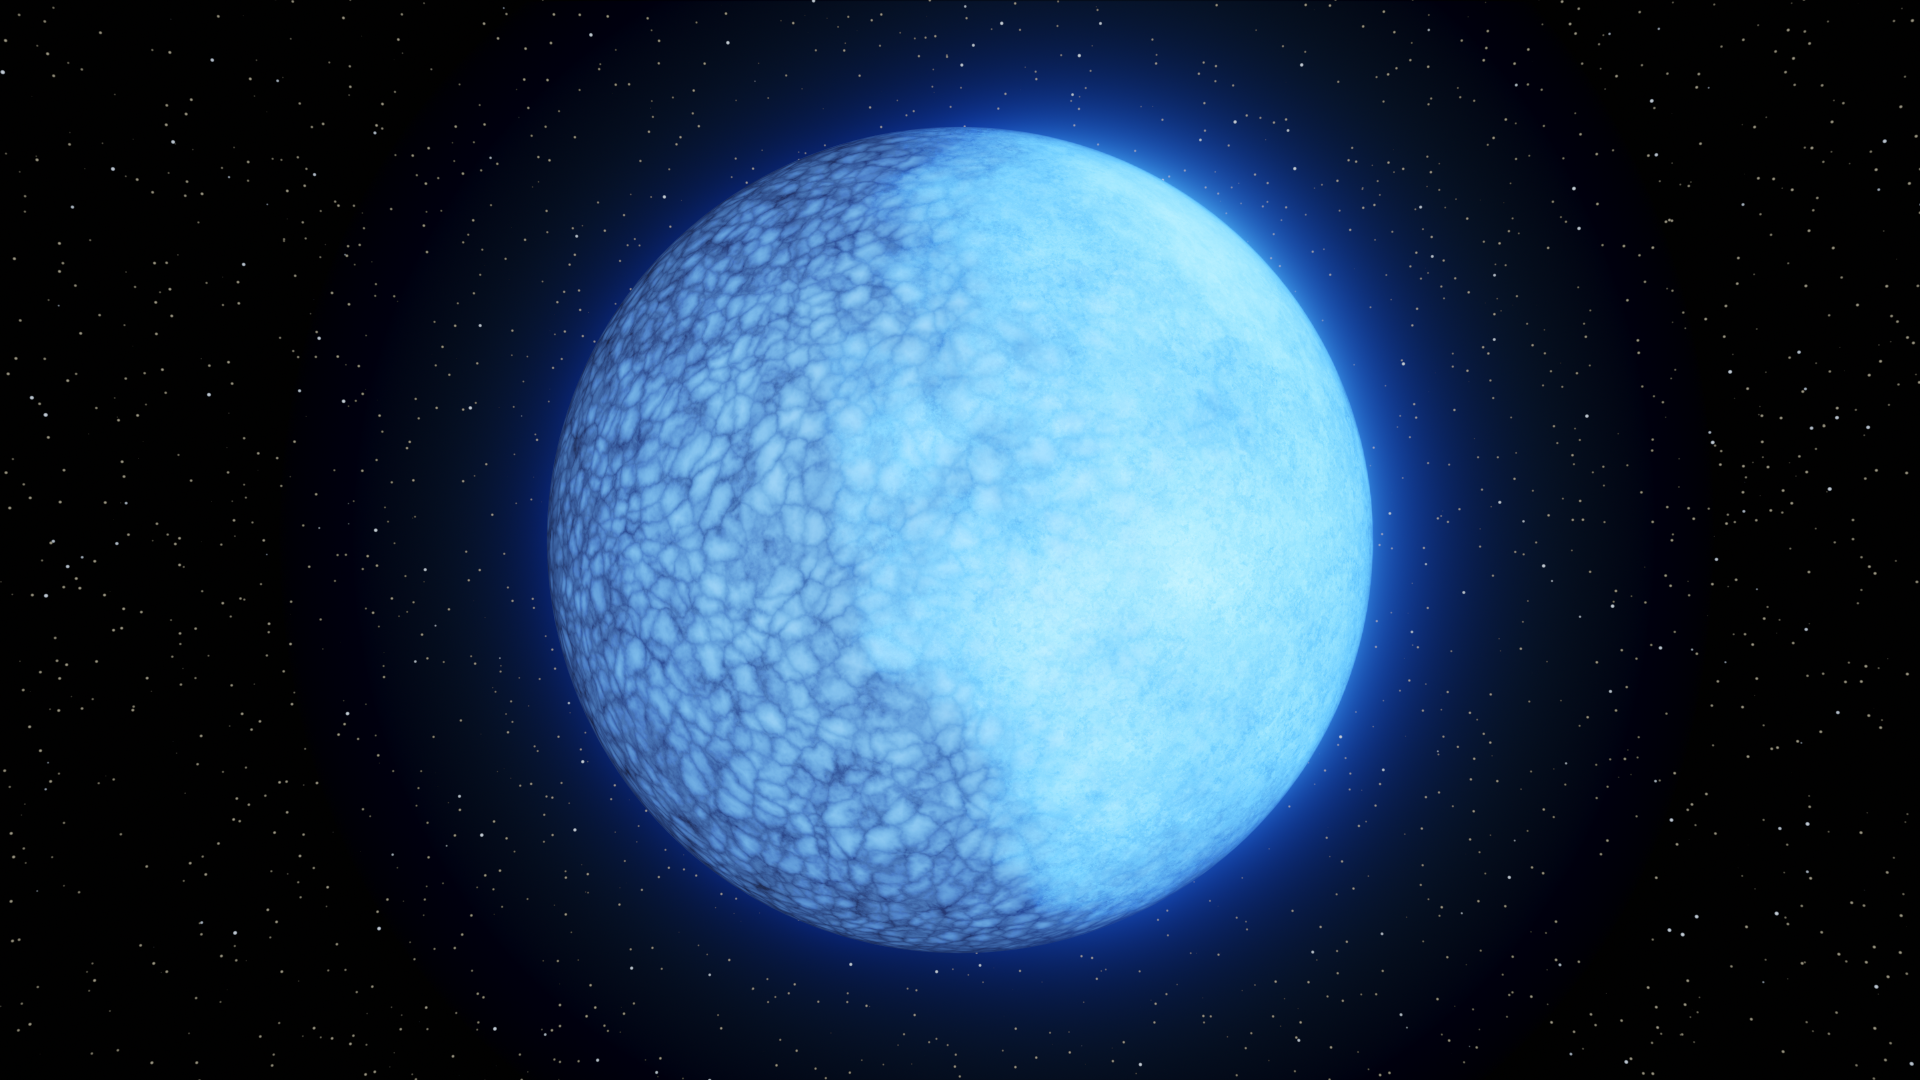 artist’s rendition of janus, the blue-tinted dead cinder of a star that is composed primarily of hydrogen on one side and helium on the other (the hydrogen side appears brighter). the peculiar double-faced nature of this white dwarf star might be due to the interplay of magnetic fields and convection, or a mixing of materials. on the helium side, which appears bubbly, convection has destroyed the thin hydrogen layer on the surface and brought up the helium underneath. Image credit: K. Miller, Caltech/IPAC